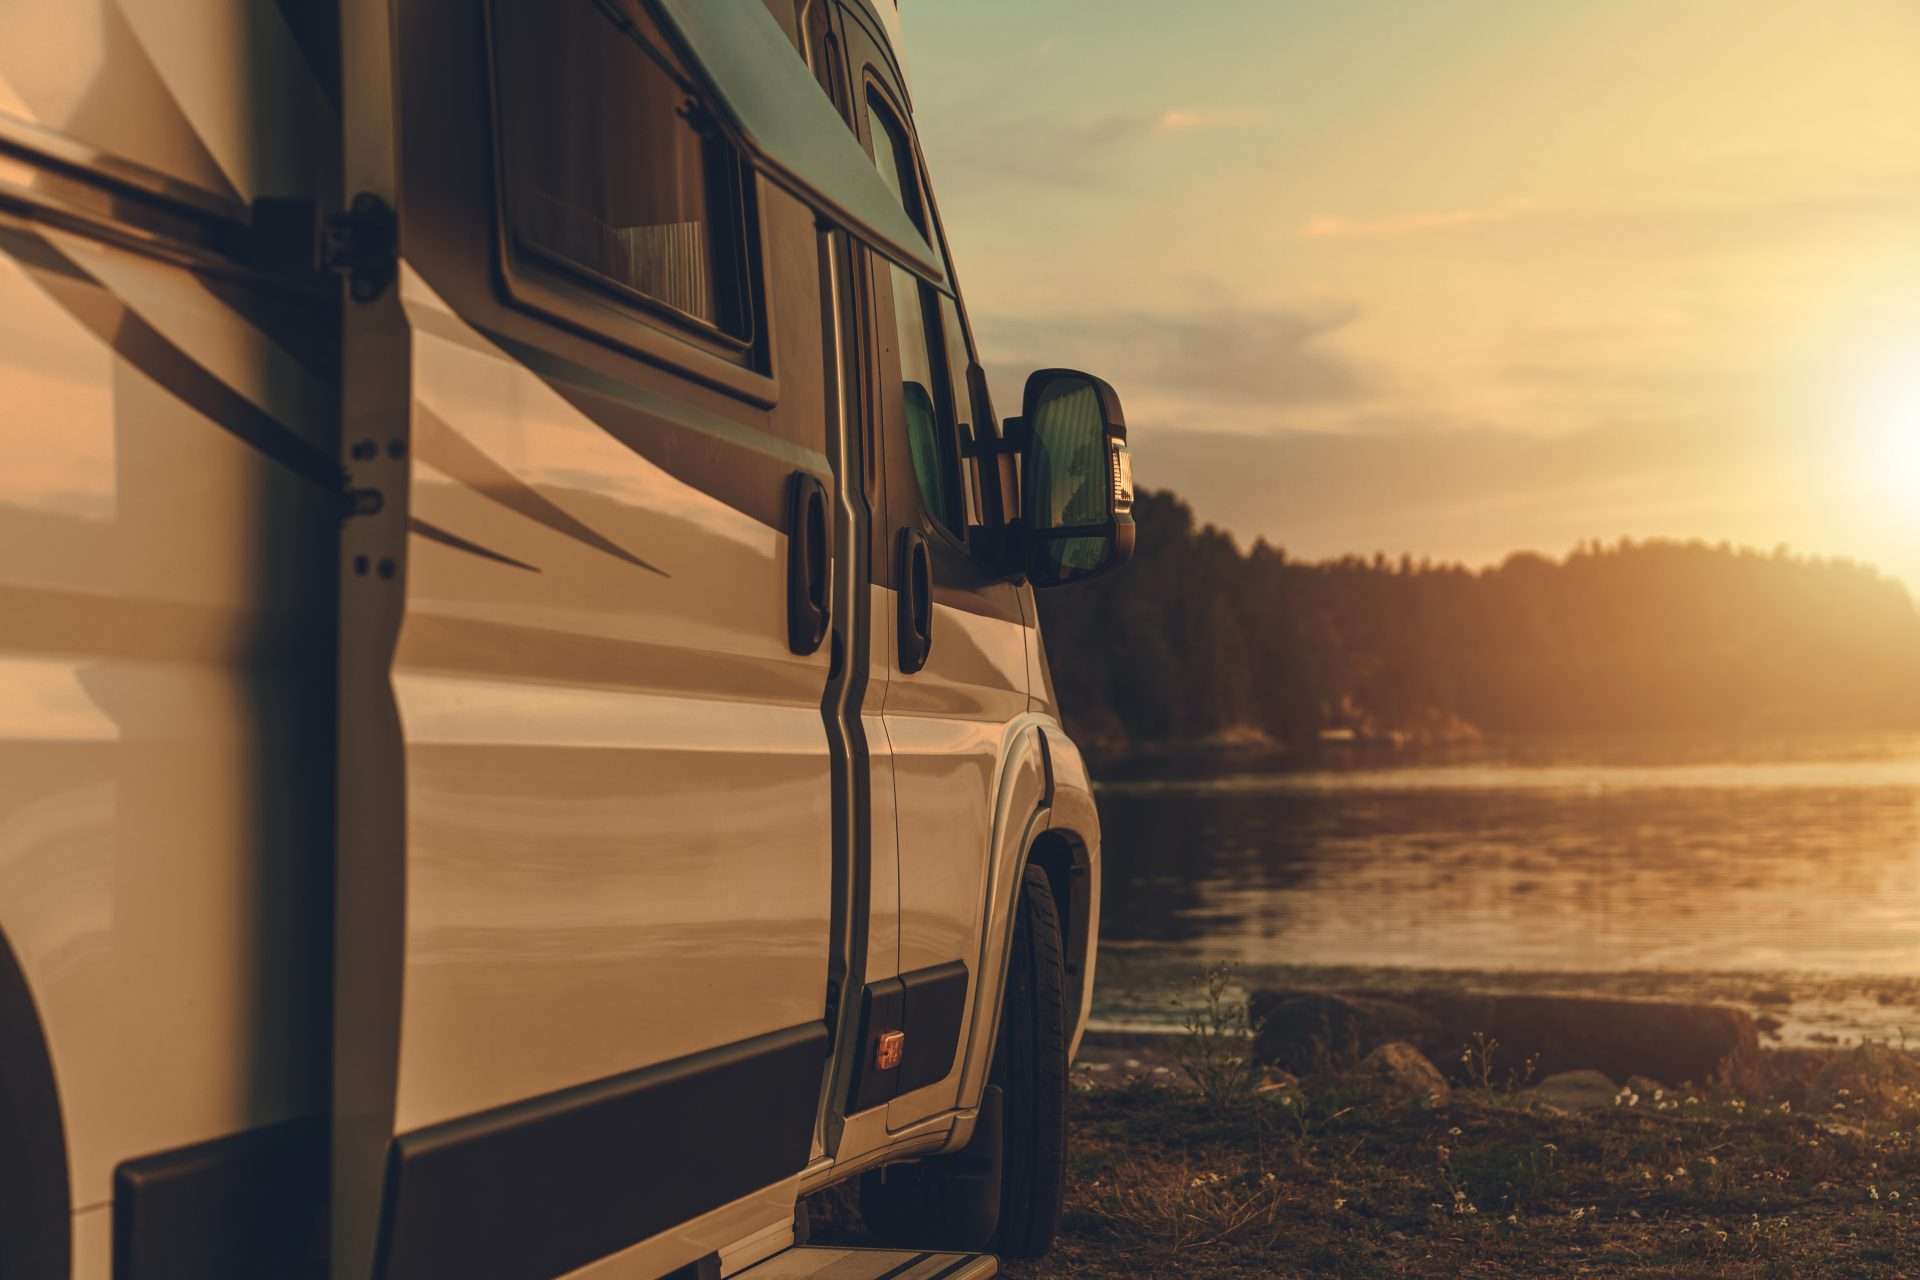 RV parked by lake in sunset